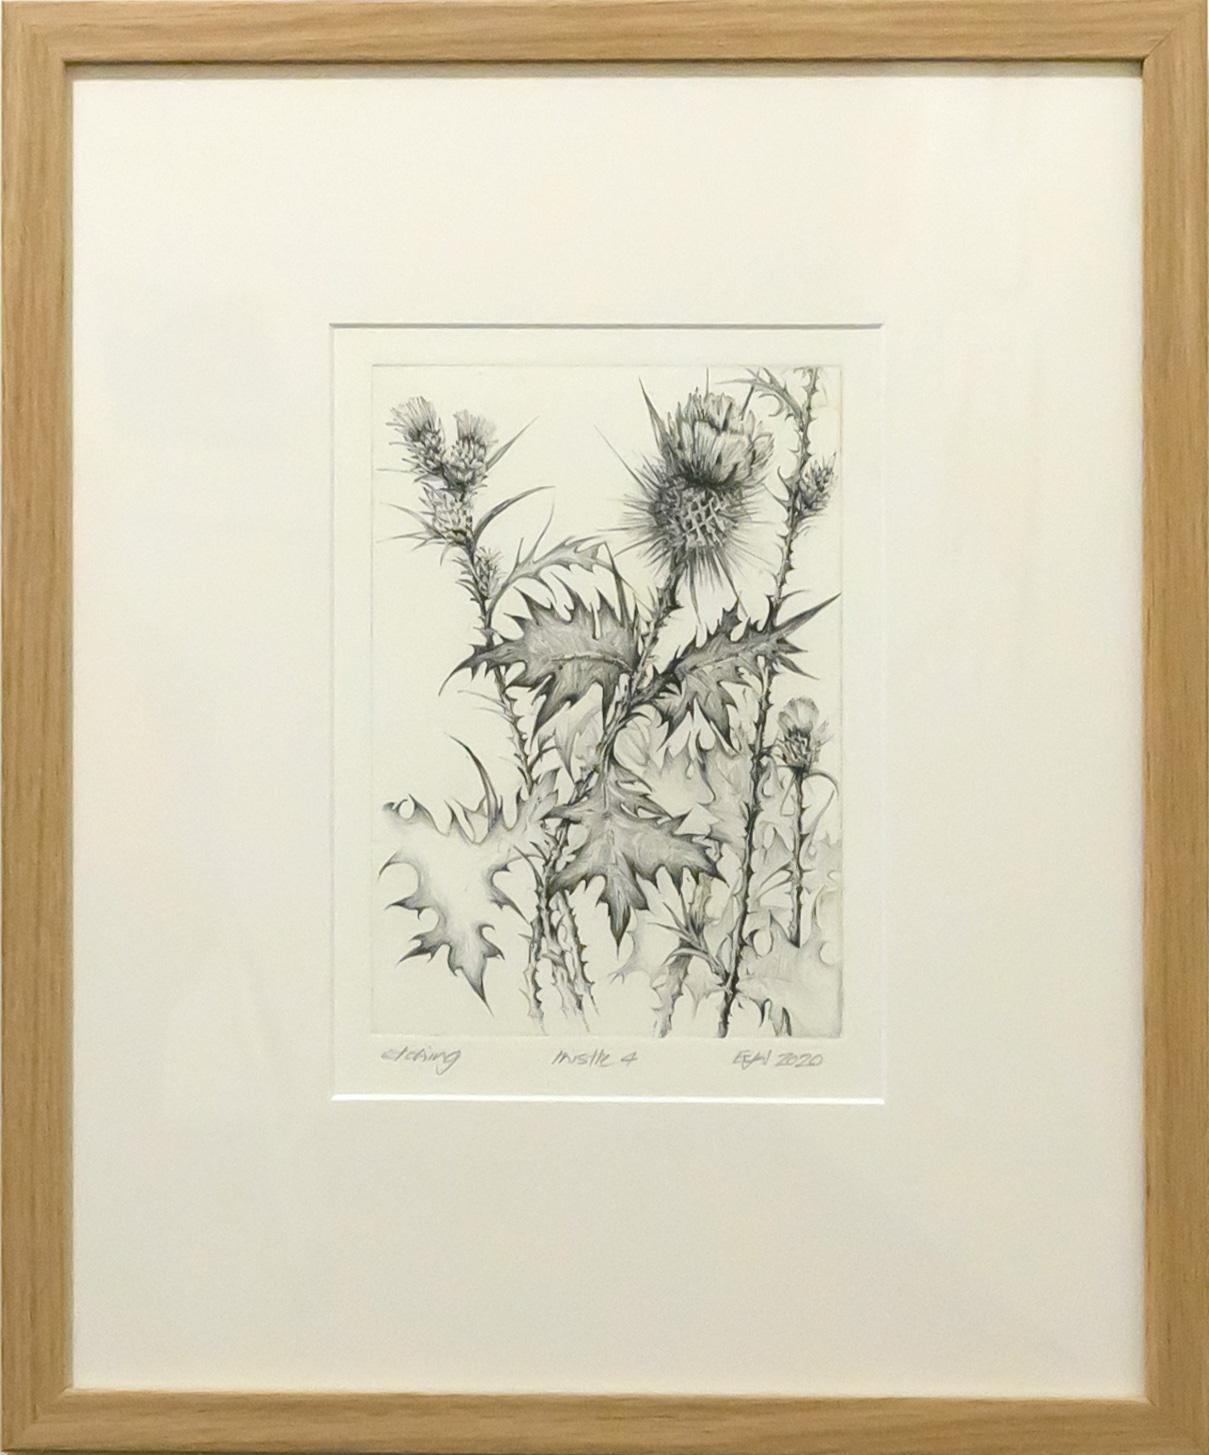 Framed artwork by Libby Altschwager of a b&w image of a Scotch Thistle